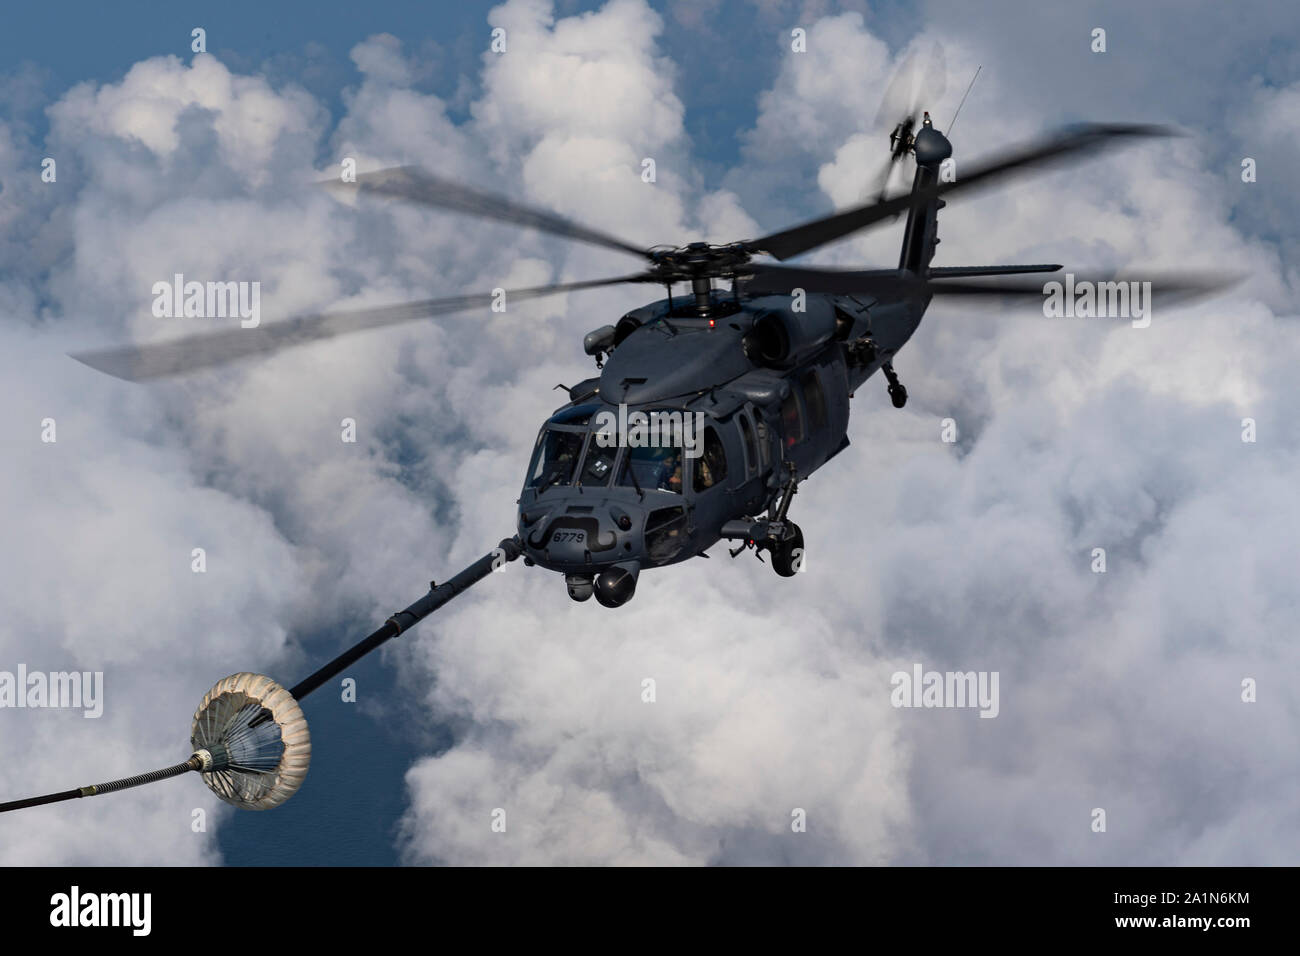 A U.S. Air Force HH-60G Pave Hawk connects with a drogue for helicopter air-to-air refueling in the skies above the Atlantic Ocean Sept. 7, 2019. U.S. Northern Command provided military-unique capabilities to the U.S. Agency for International Development, enabling the broader relief efforts addressing the acute humanitarian needs of the Bahamian people. (U.S. Air Force photo by Airman 1st Class Hayden Legg) Stock Photo